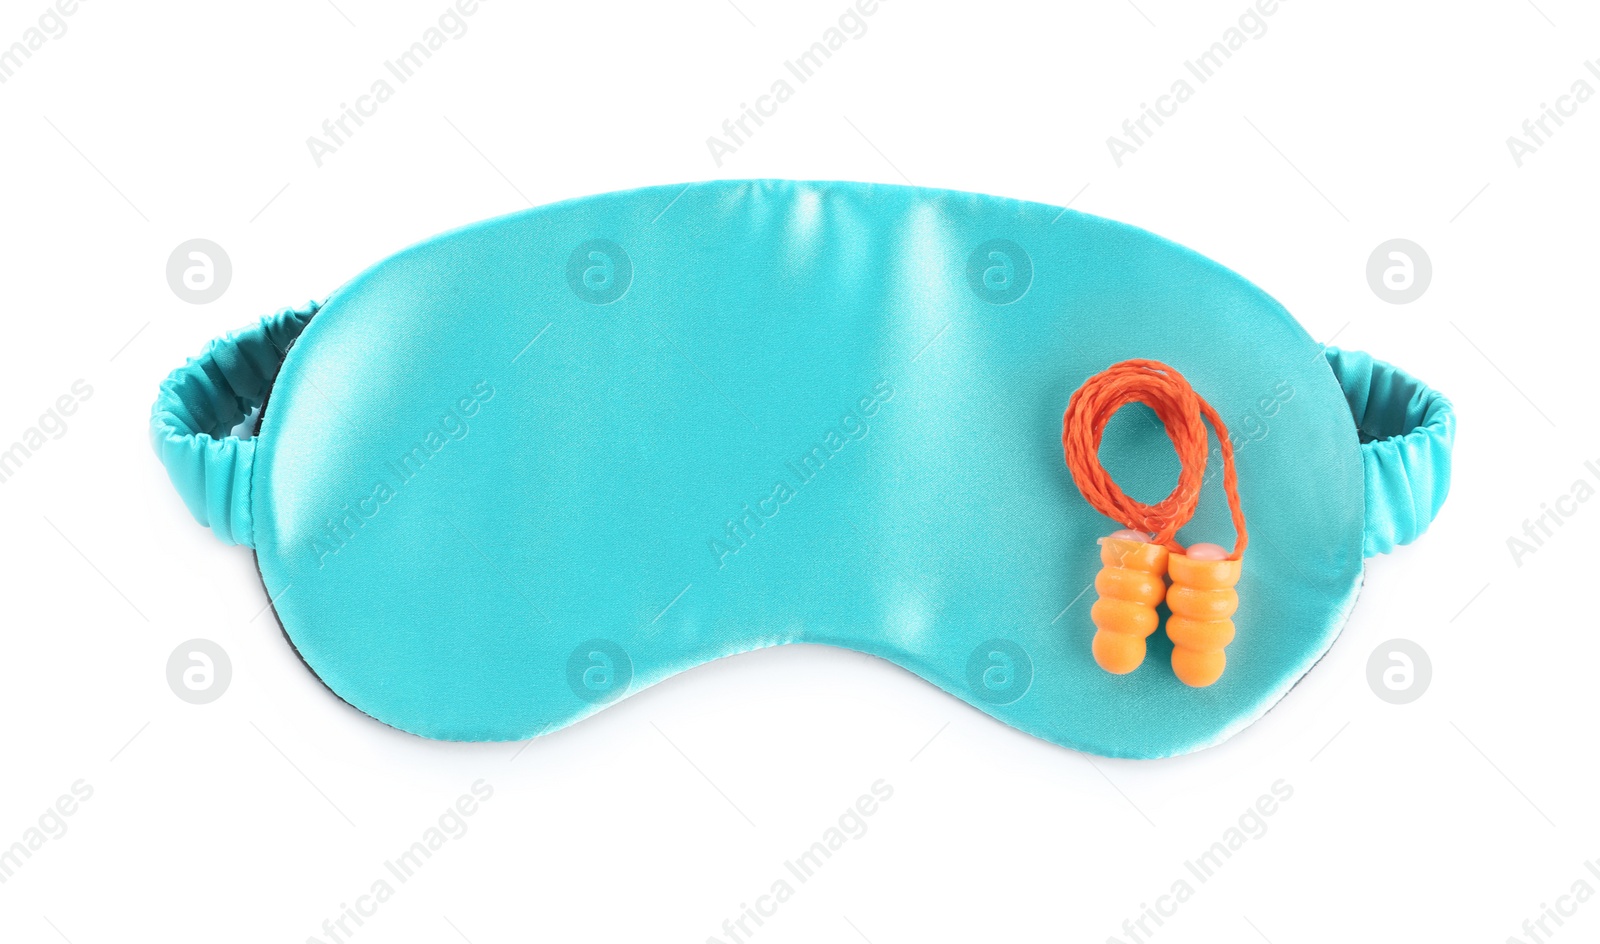 Photo of Pair of ear plugs and light blue sleeping mask on white background, top view